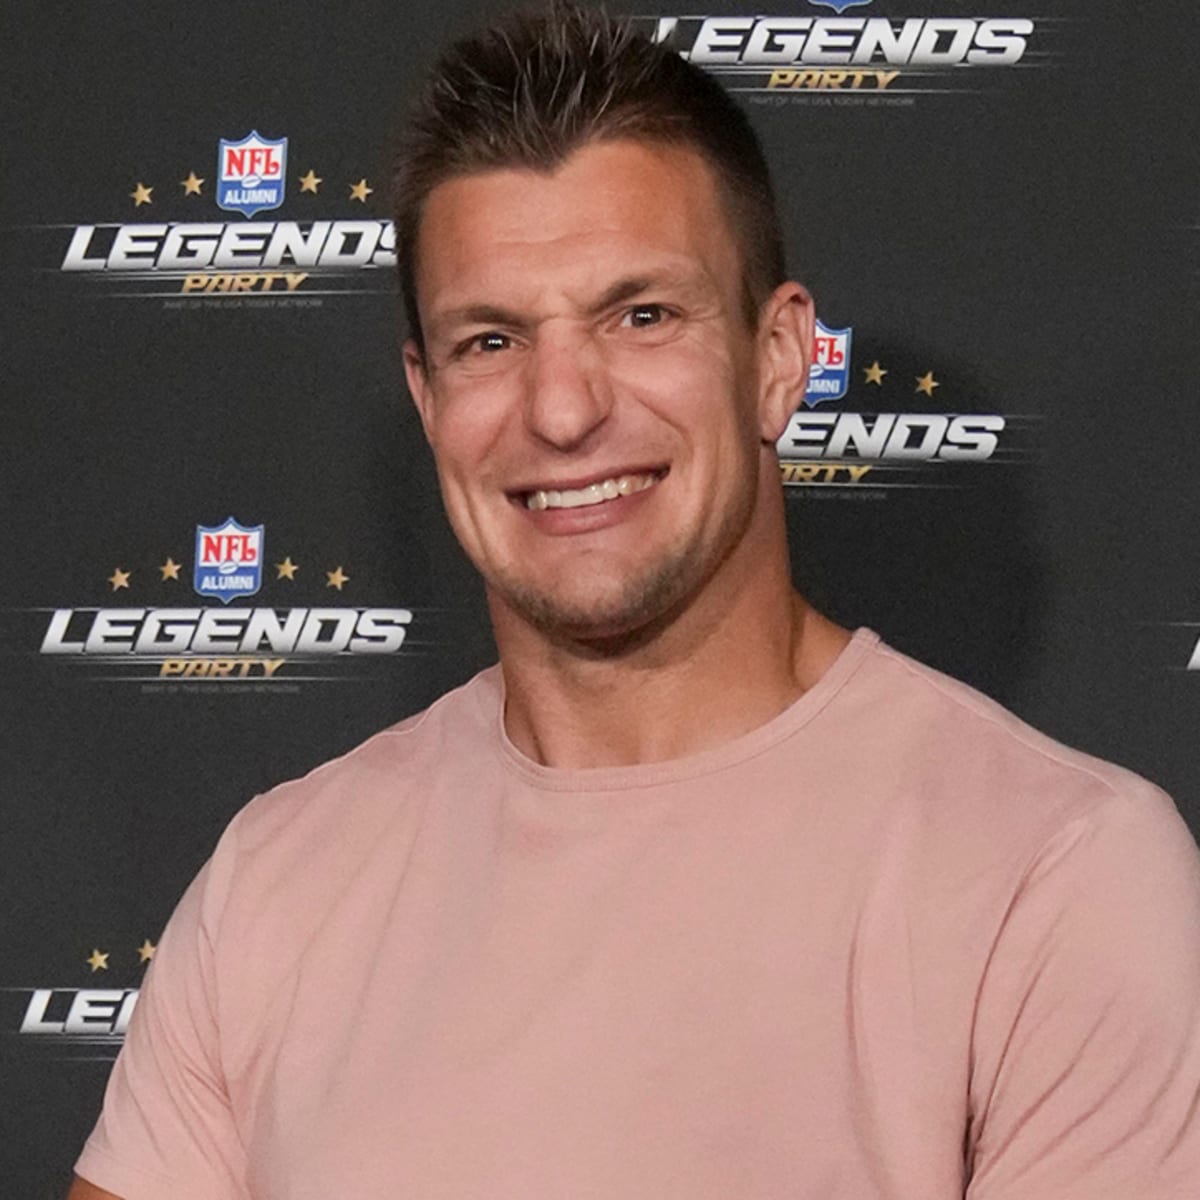 Rob Gronkowski Featured As Celtic In Cool NBA/NFL Jersey Mashup